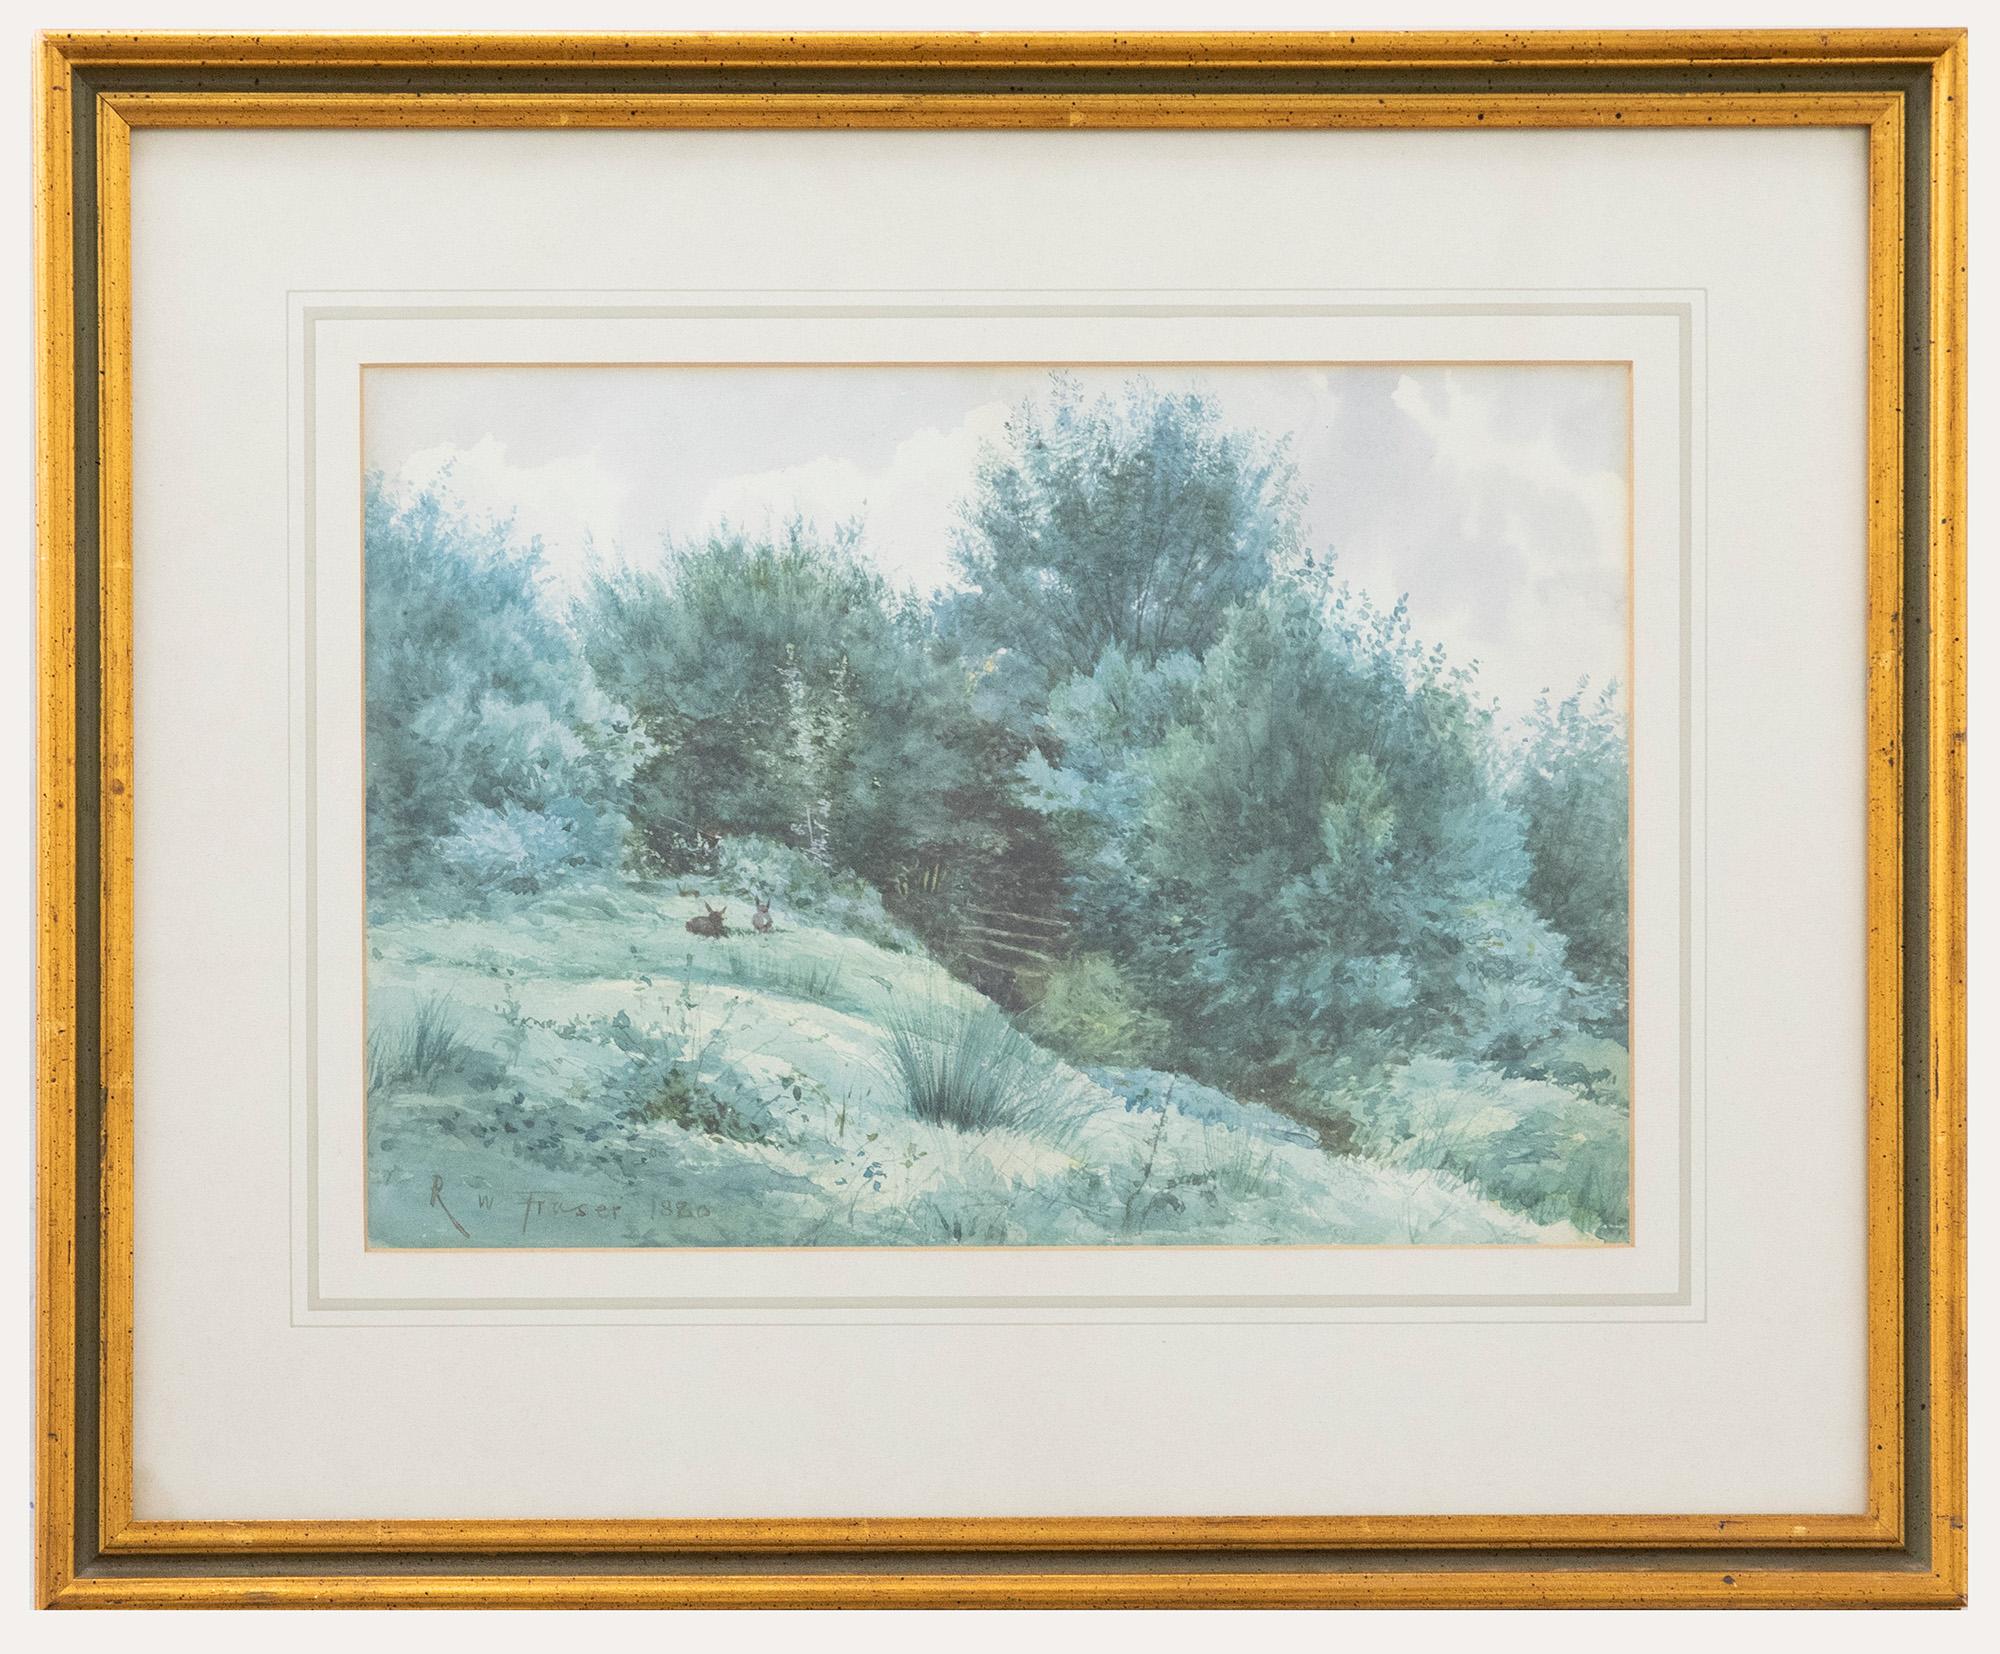 A delightful watercolour painting by the artist Robert Winchester Fraser (1848-1906), depicting wild rabbits grazing a sunny hillside. The watercolour has been signed and dated to the lower left. Presented in an attractive gilt frame with a classic